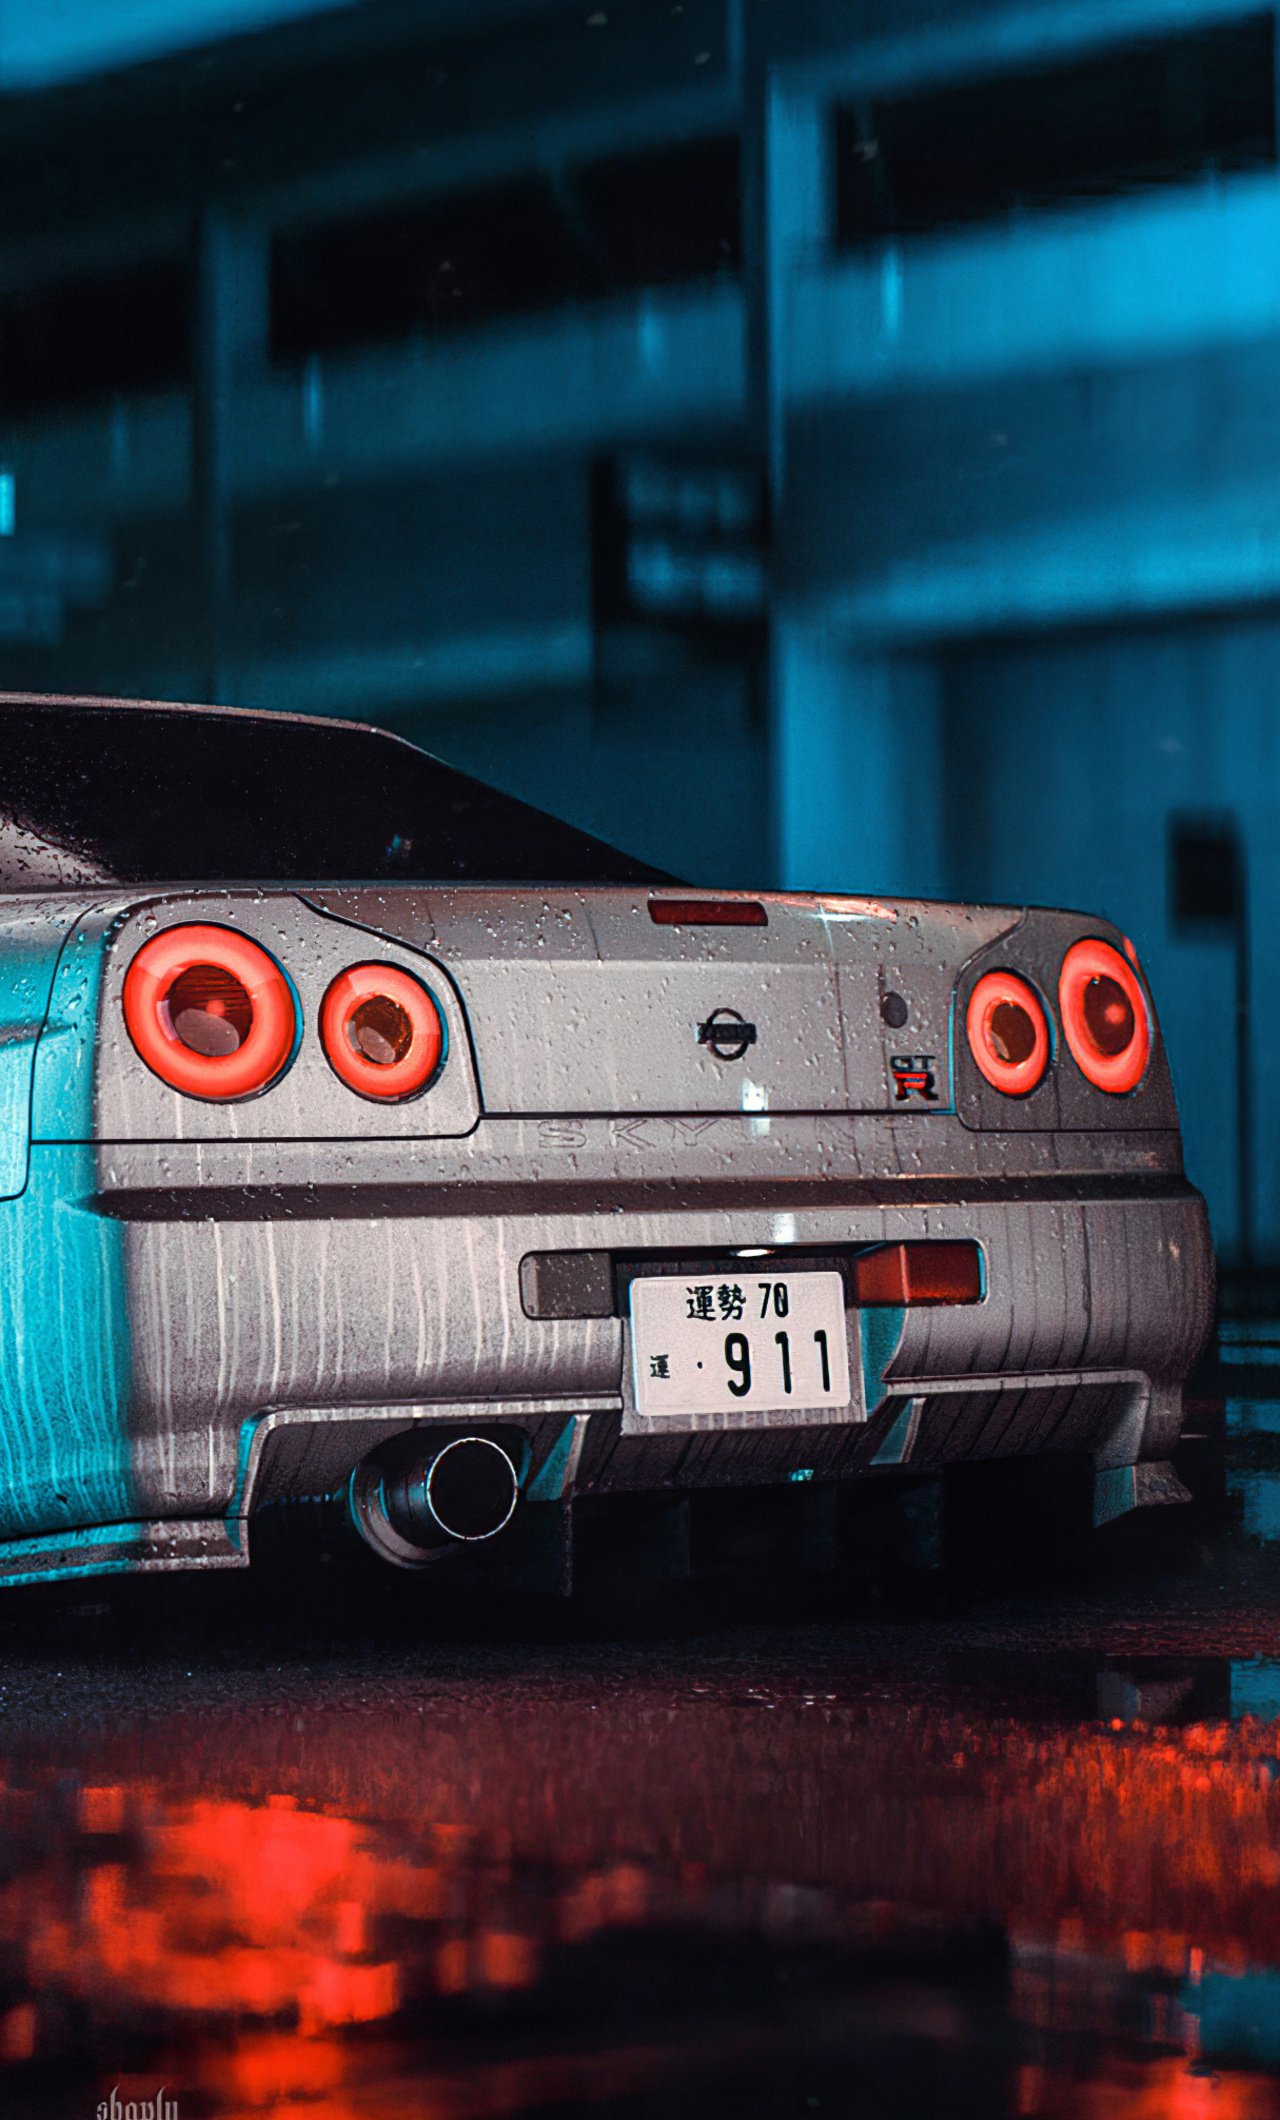 Top nissan skyline r34 iphone wallpaper HD Download Book Source for free download HD, 4K & high quality wallpaper